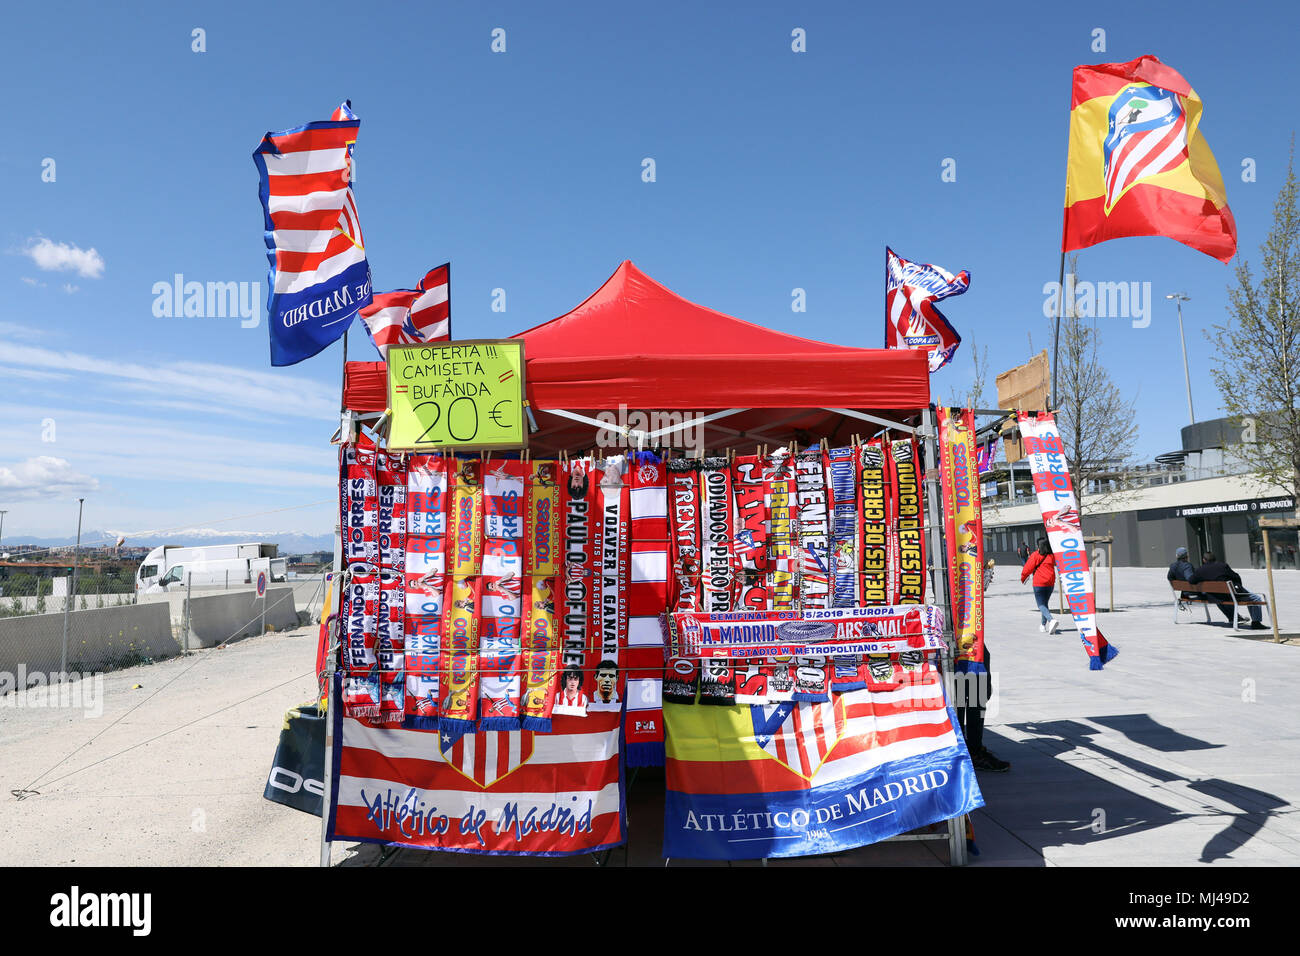 May 3, 2018 - Madrid, Spain - Stall sells flags and scarves nearby the  stadium ahead of the UEFA Europa League, semi final, 2nd leg football match  between Atletico de Madrid and